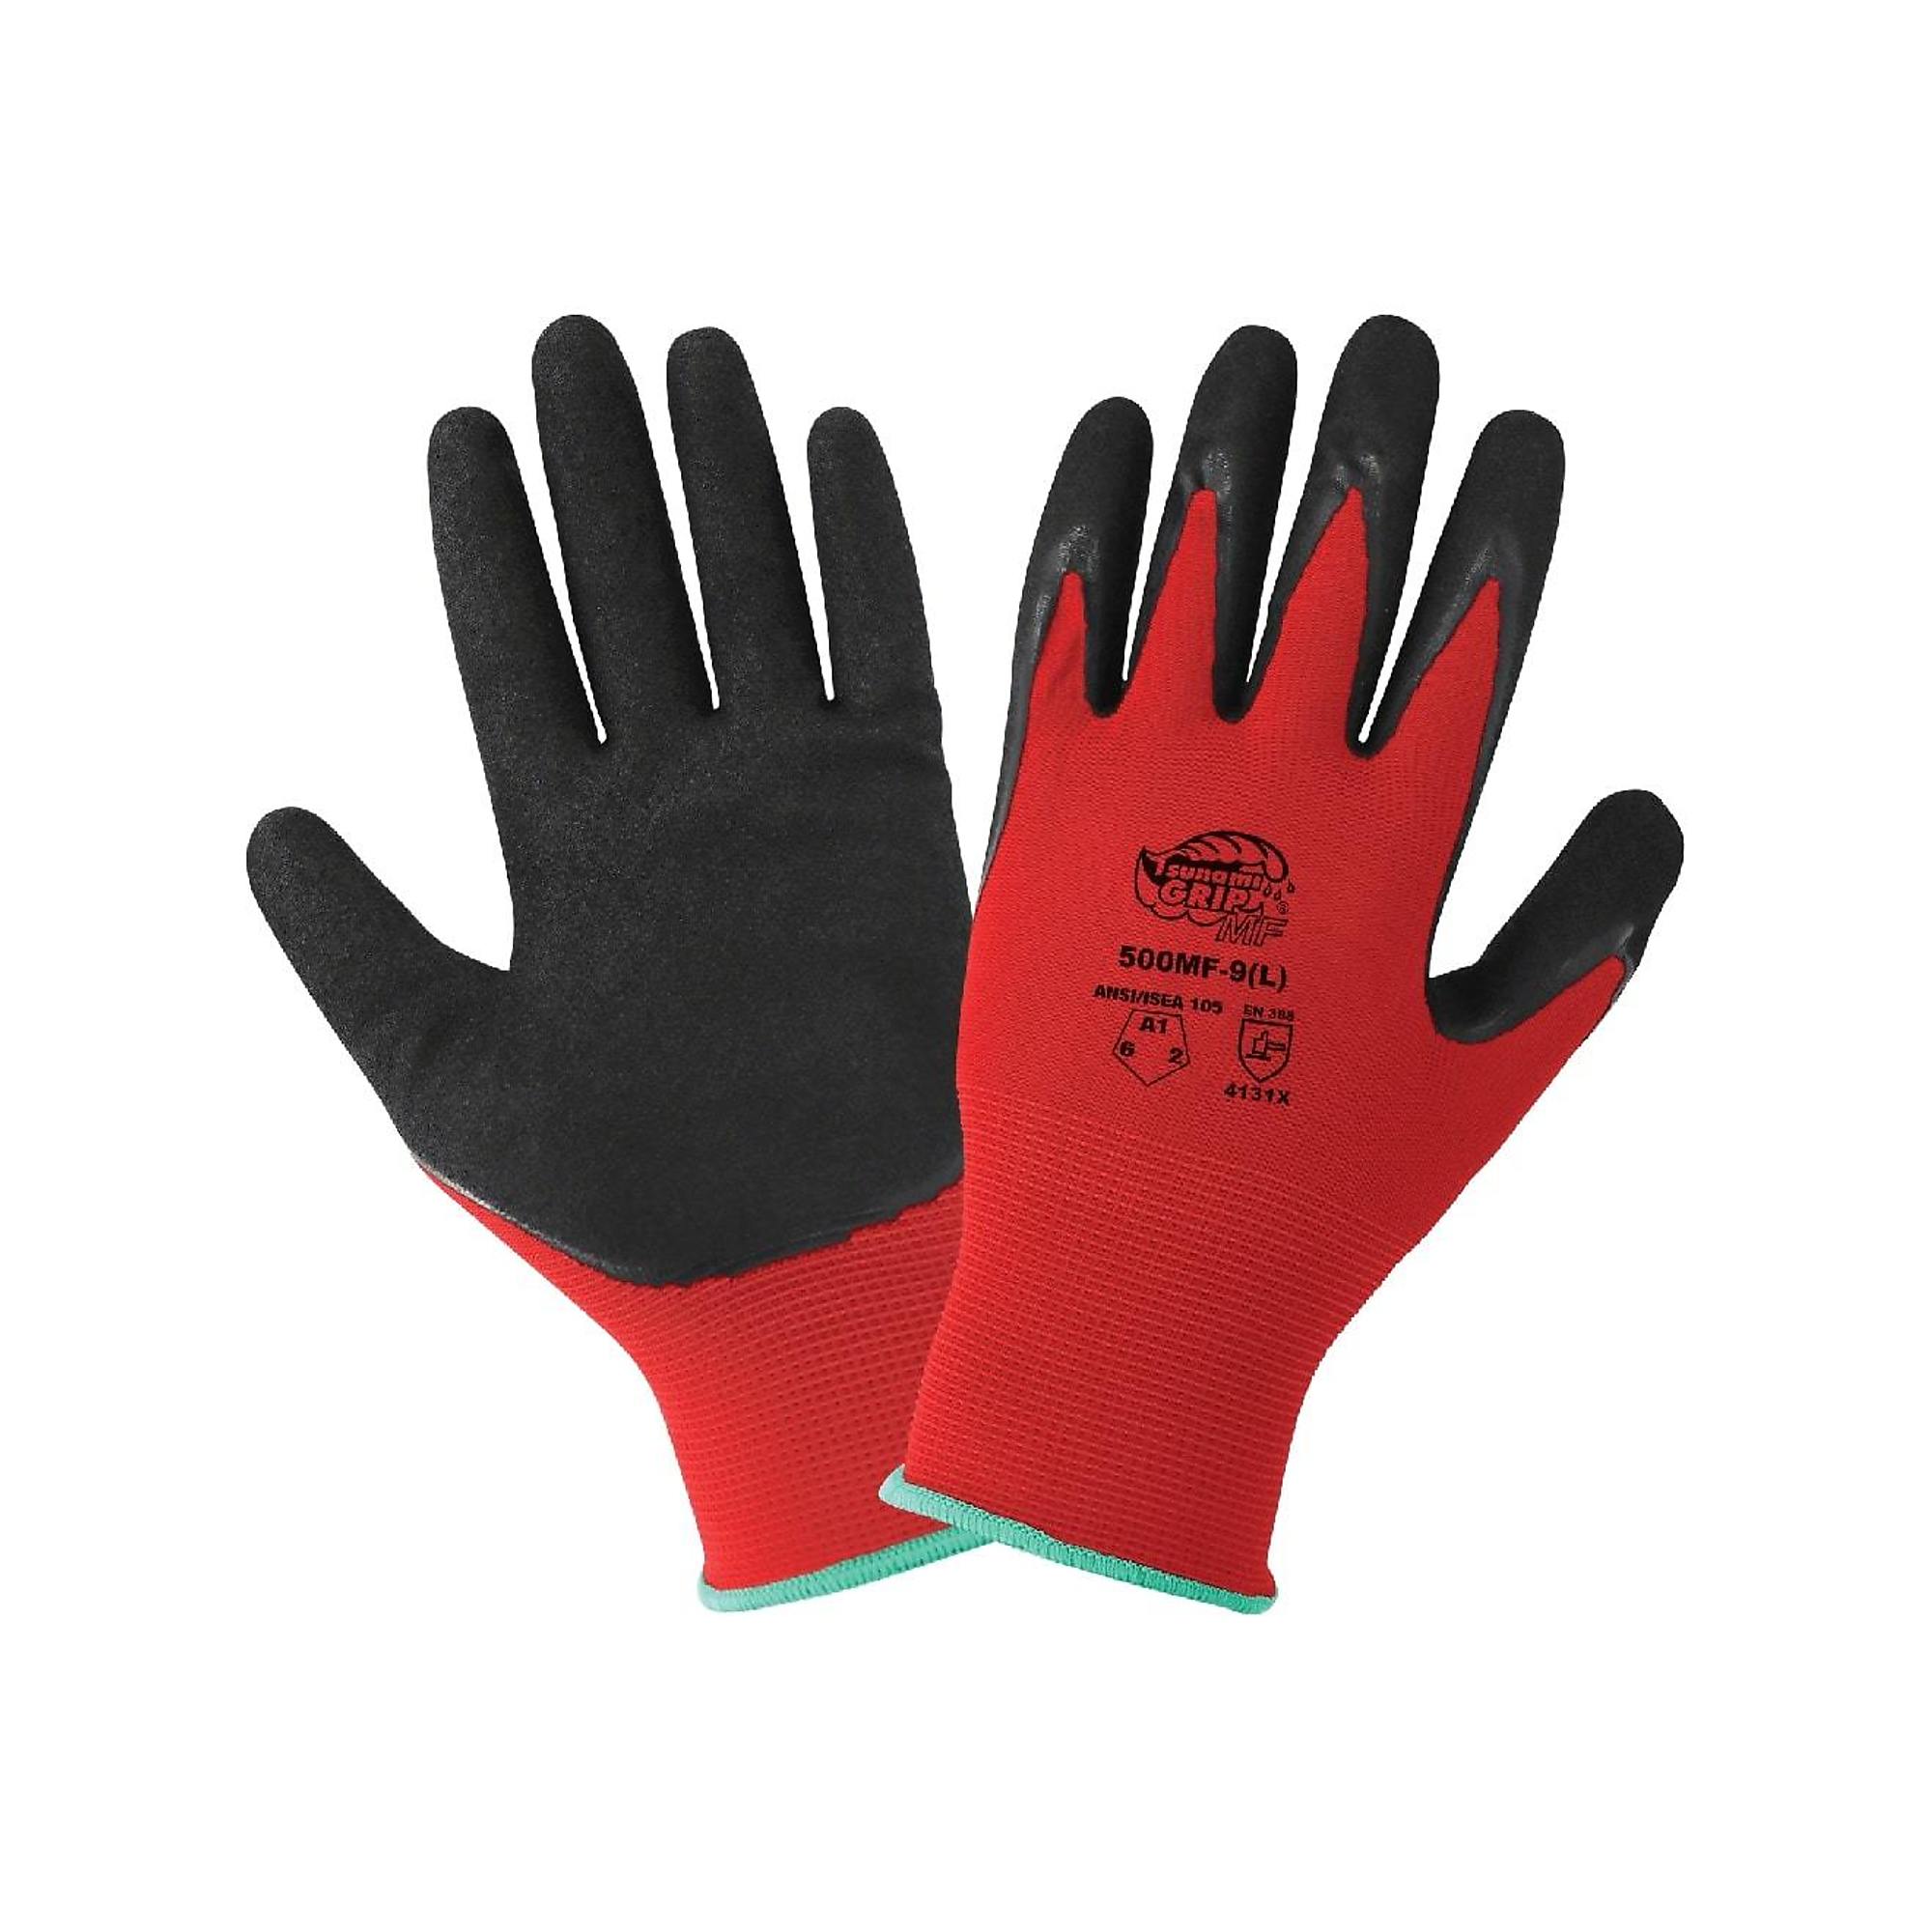 Global Glove Tsunami Grip , Red, Black Double Nitrile Coat, Cut Resist A1 Gloves-12 Pair, Size XS, Color Red/Black, Included (qty.) 12 Model 500MF-6(